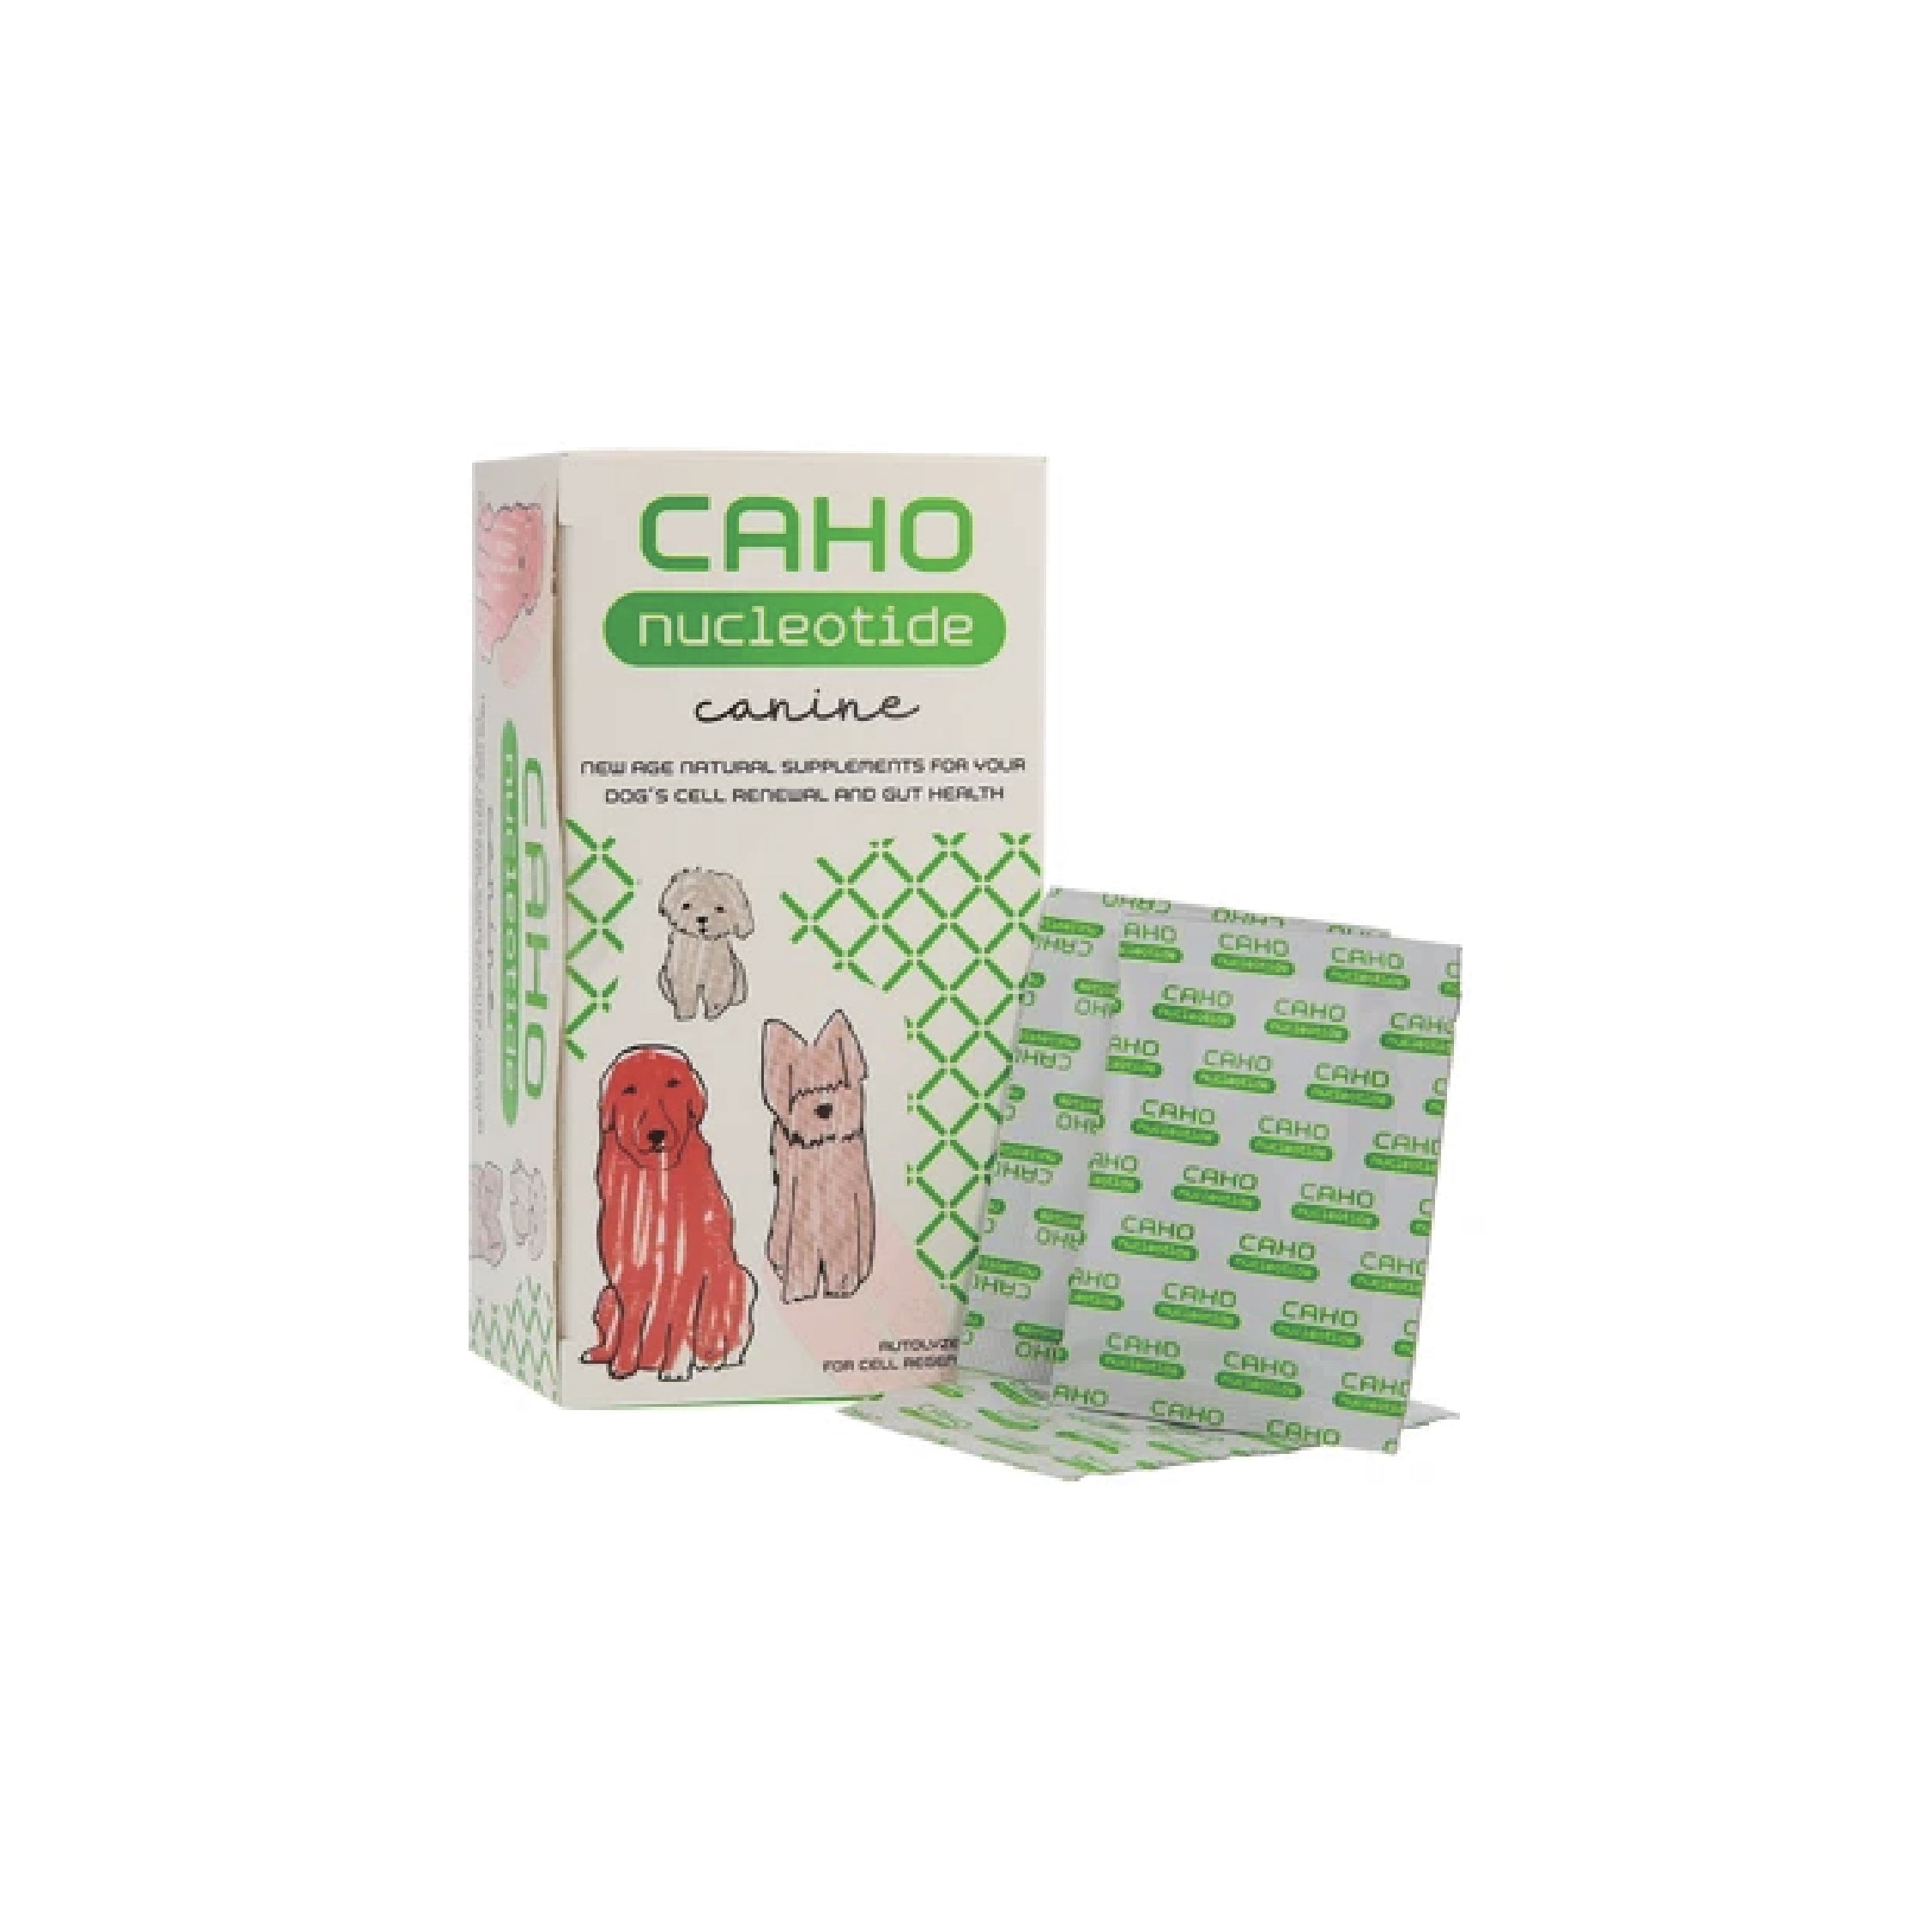 CAHO Nucleotide Canine (60g)